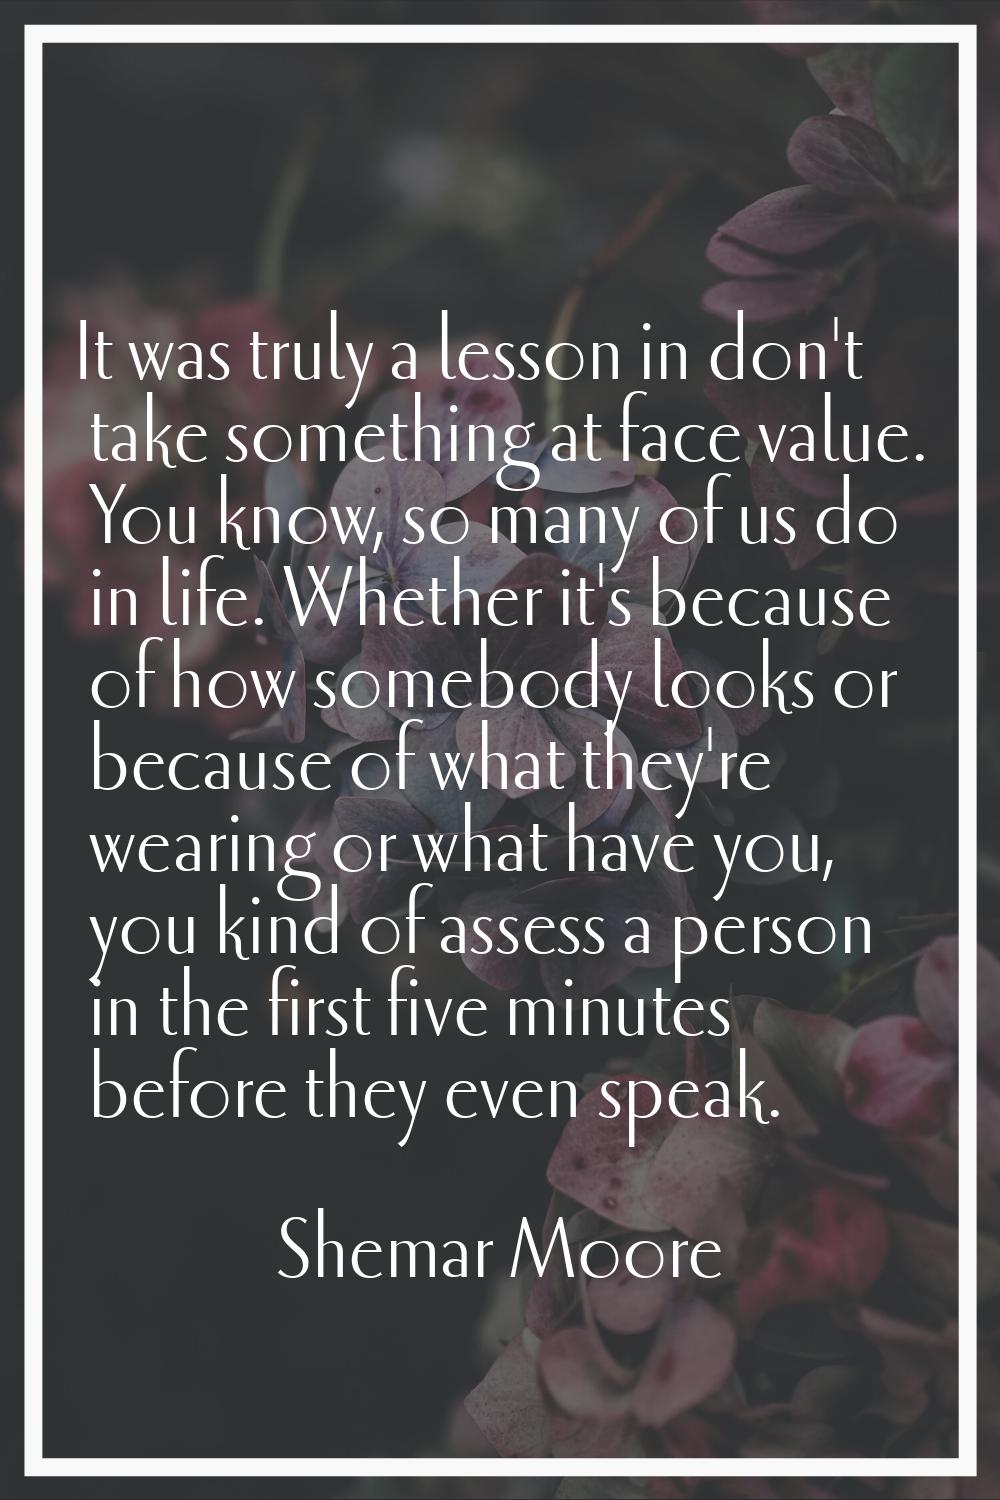 It was truly a lesson in don't take something at face value. You know, so many of us do in life. Wh